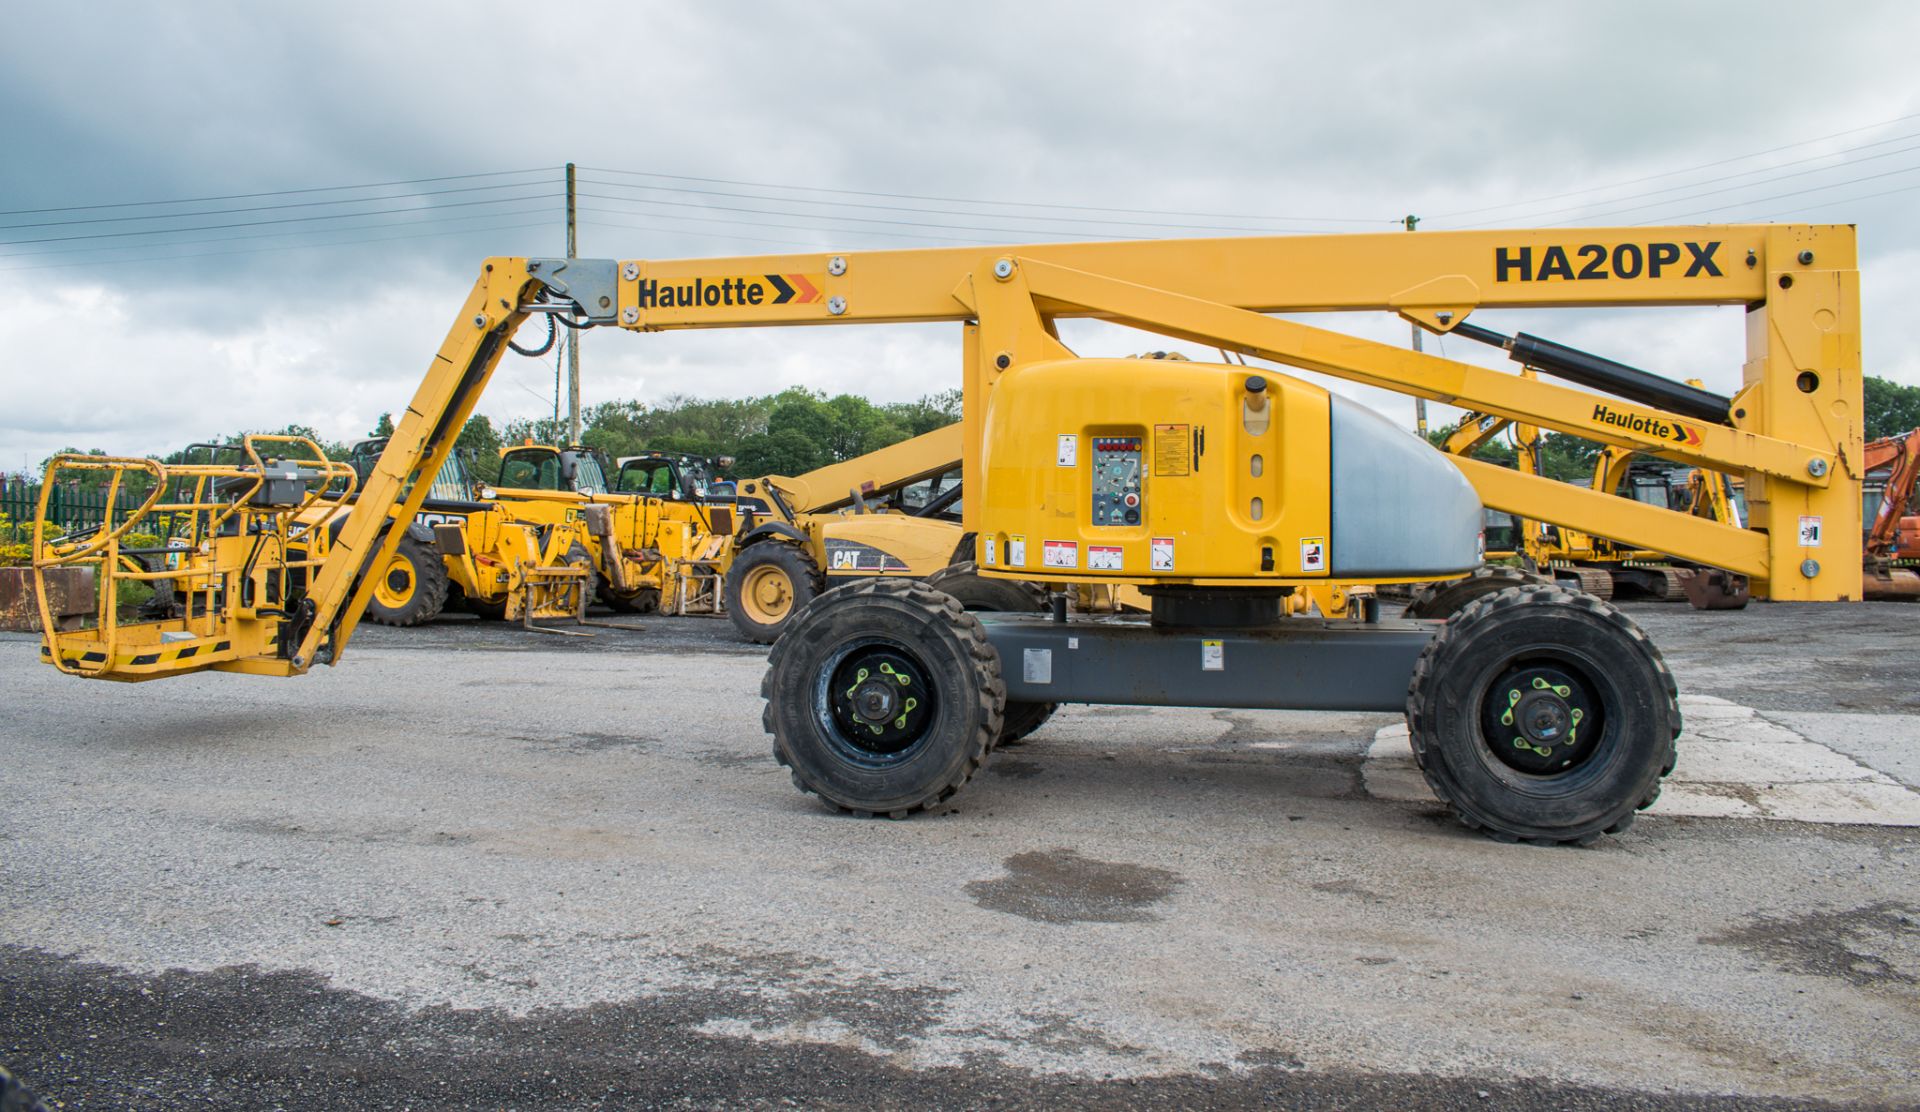 HAULOTTE HA20PX diesel driven articulated boom lift access platform Year: 2012 S/N: AD400588 - Image 8 of 14